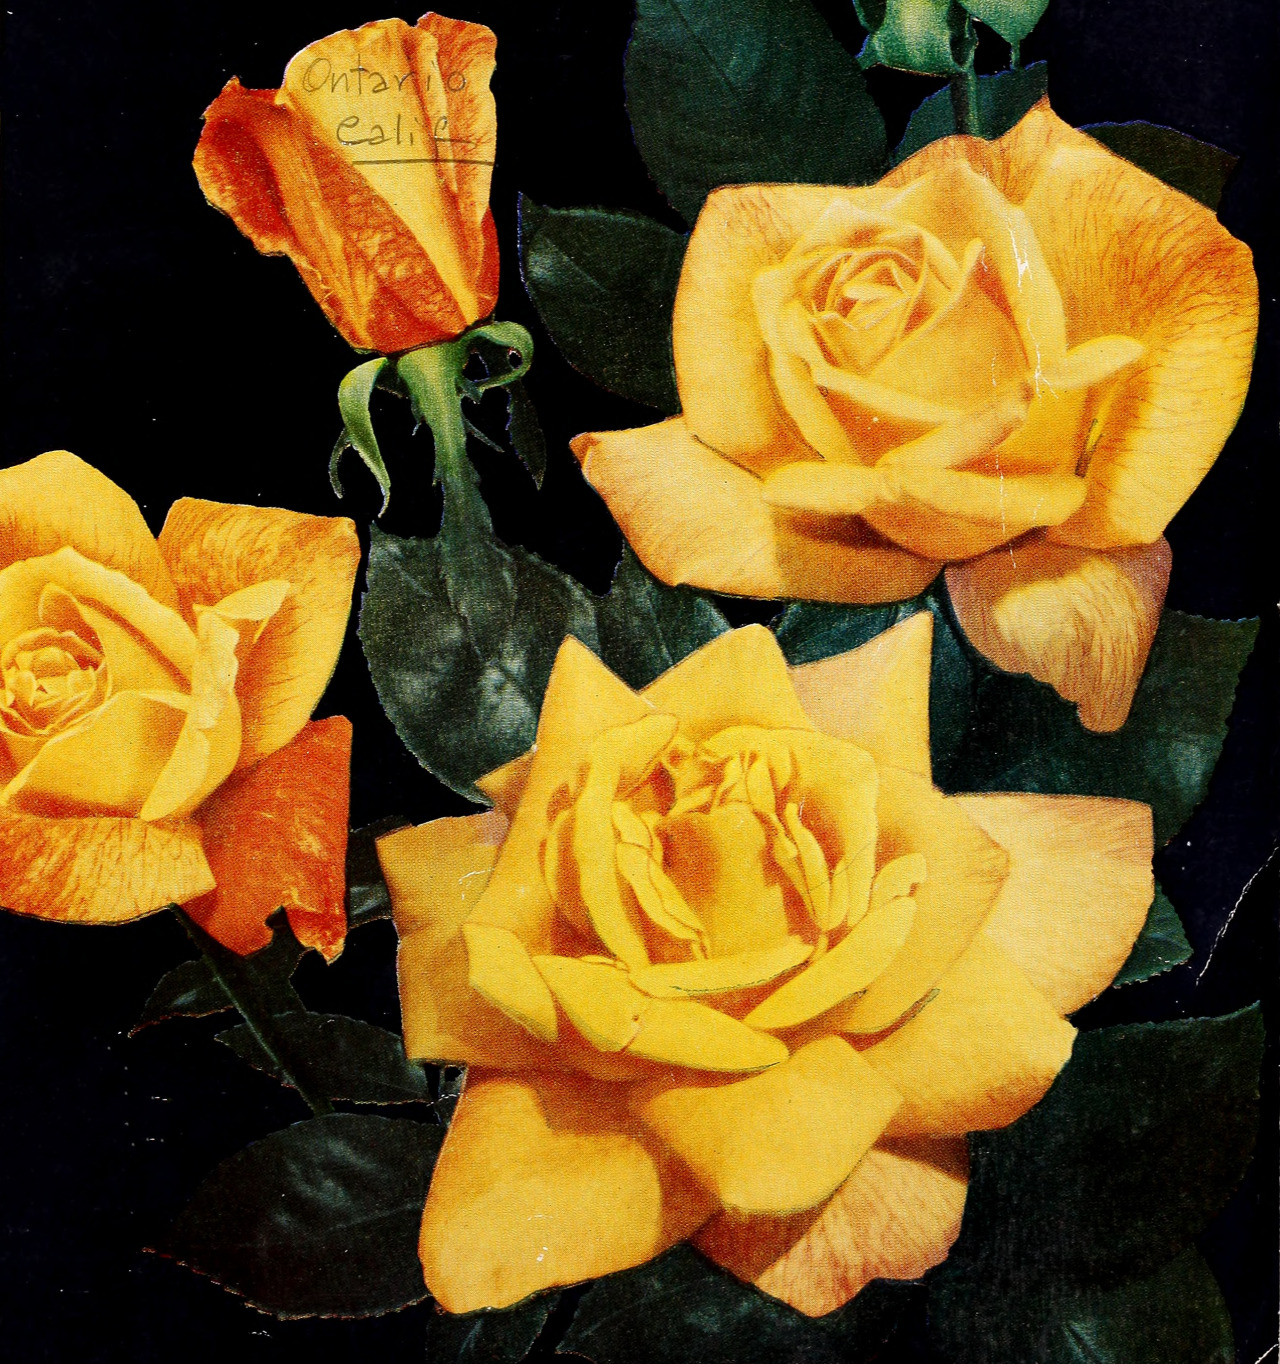 Yellow roses. Armstrong Nurseries. 1950. Catalog cover detail.Internet Archive #roses#flowers#garden catalog#gardening catalogue#cover#nemfrog#1950#1950s